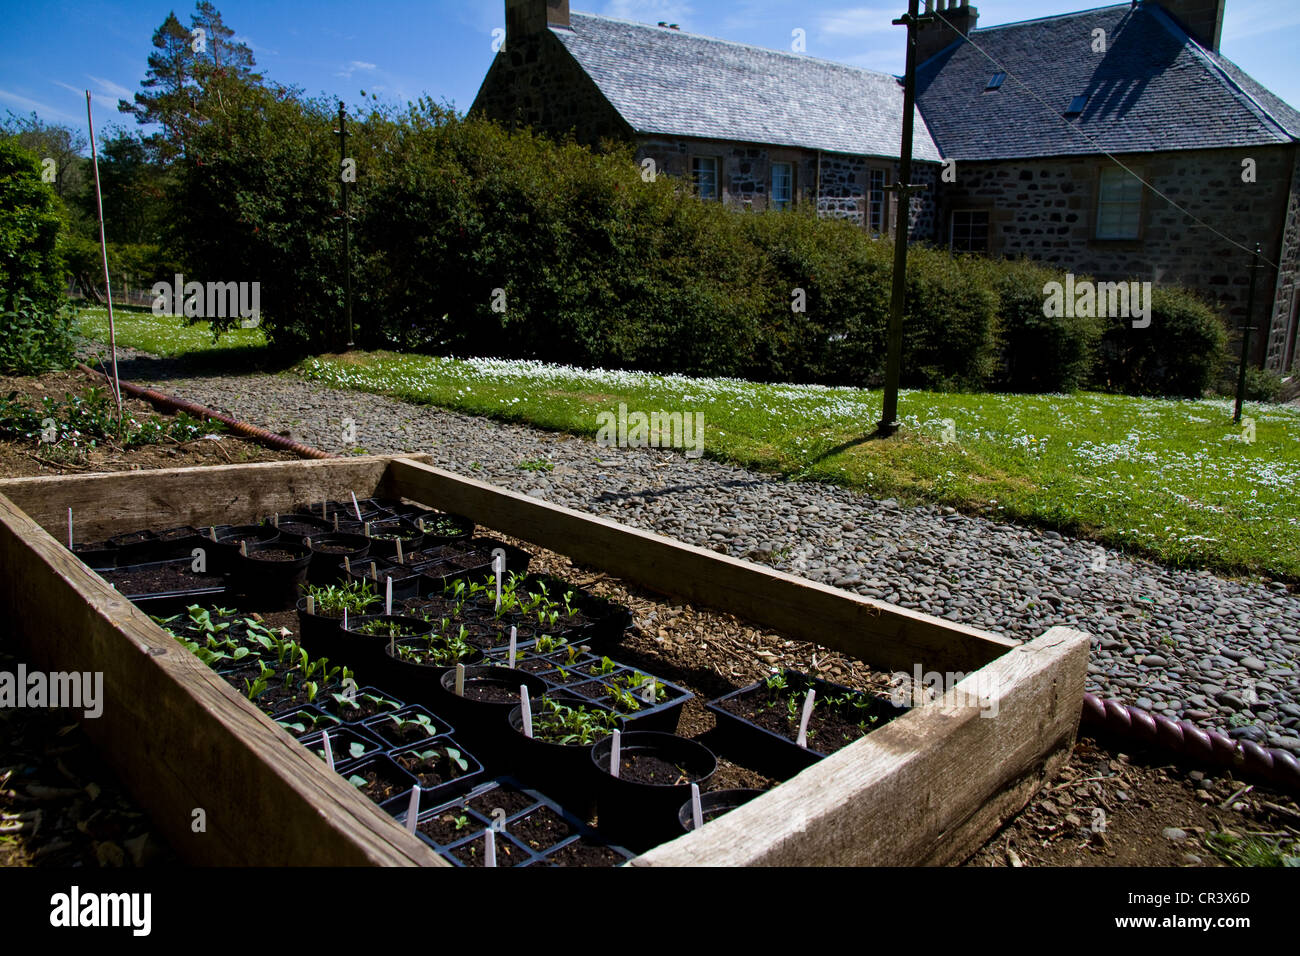 The cold frame in the garden at Canna House, Small Isles, Scotland Stock Photo